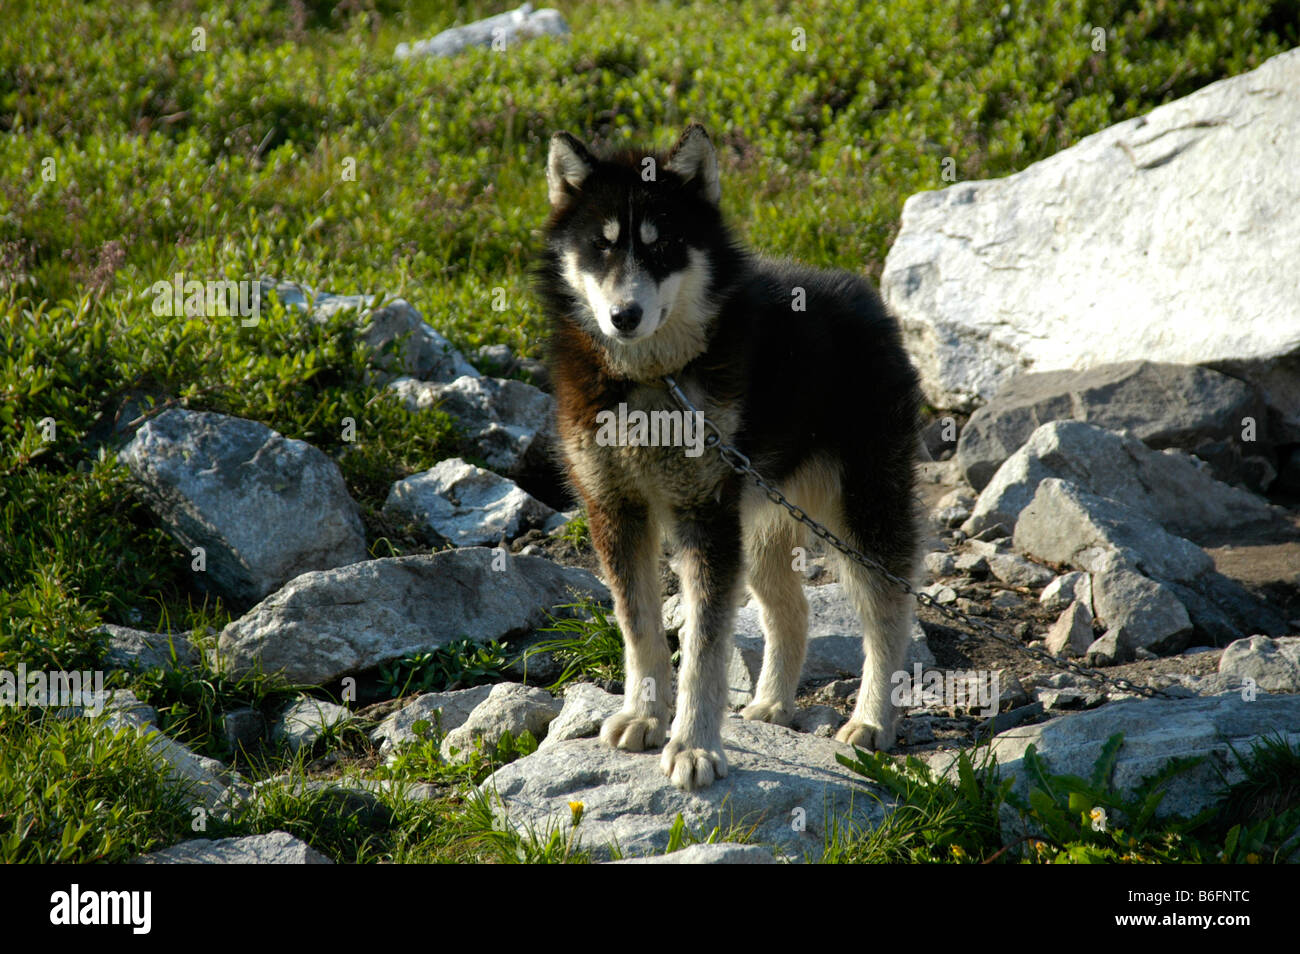 Sled dog chained to a rock on a green meadow, Tiniteqilaaq, East Greenland, Arctic Stock Photo